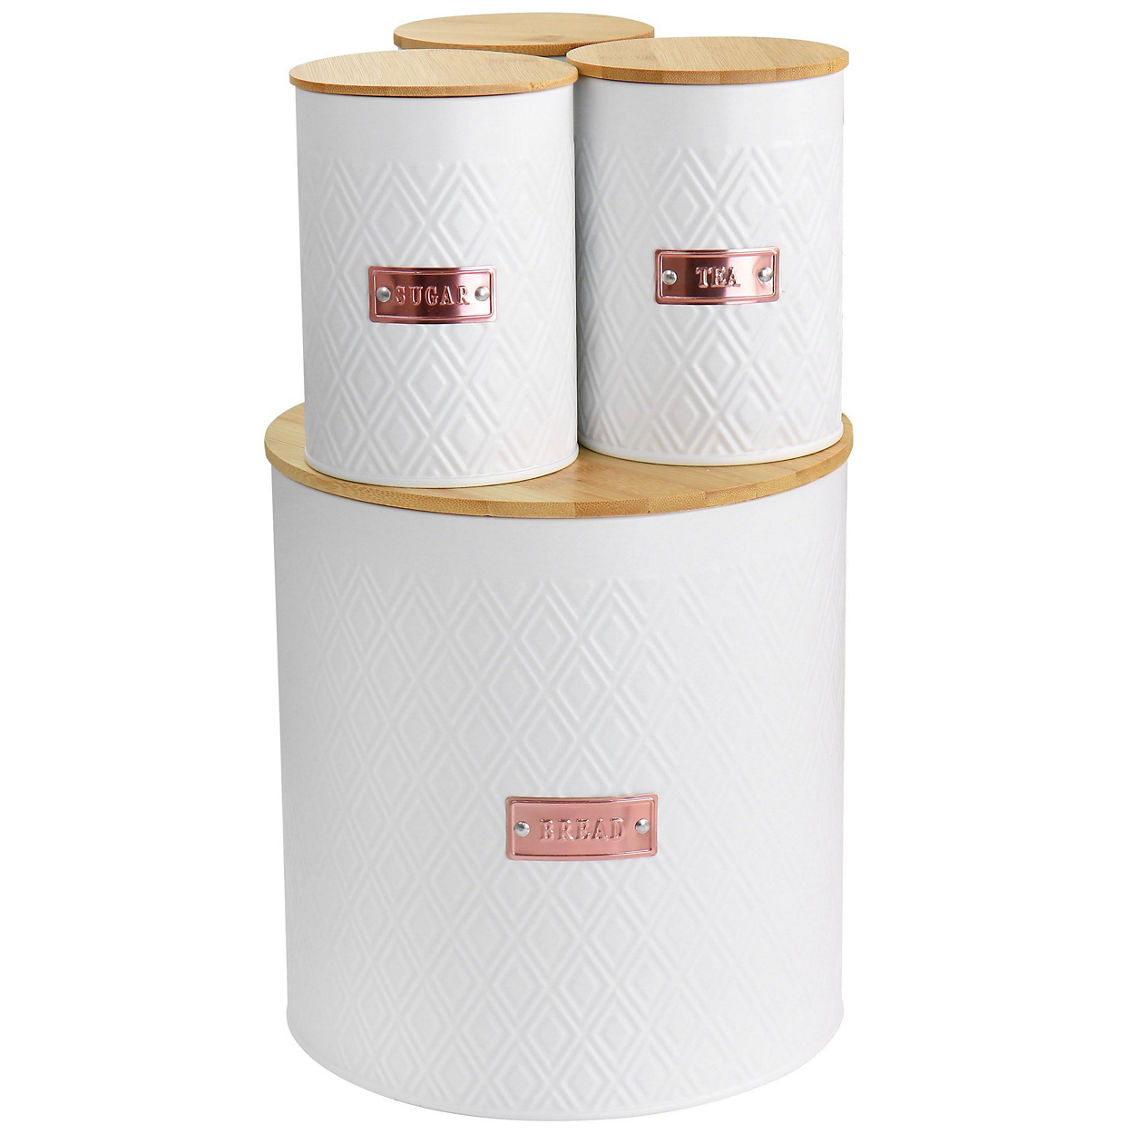 MegaChef Kitchen Food Storage and Organization 4 Piece Argyle Canister Set in Wh - Image 2 of 5